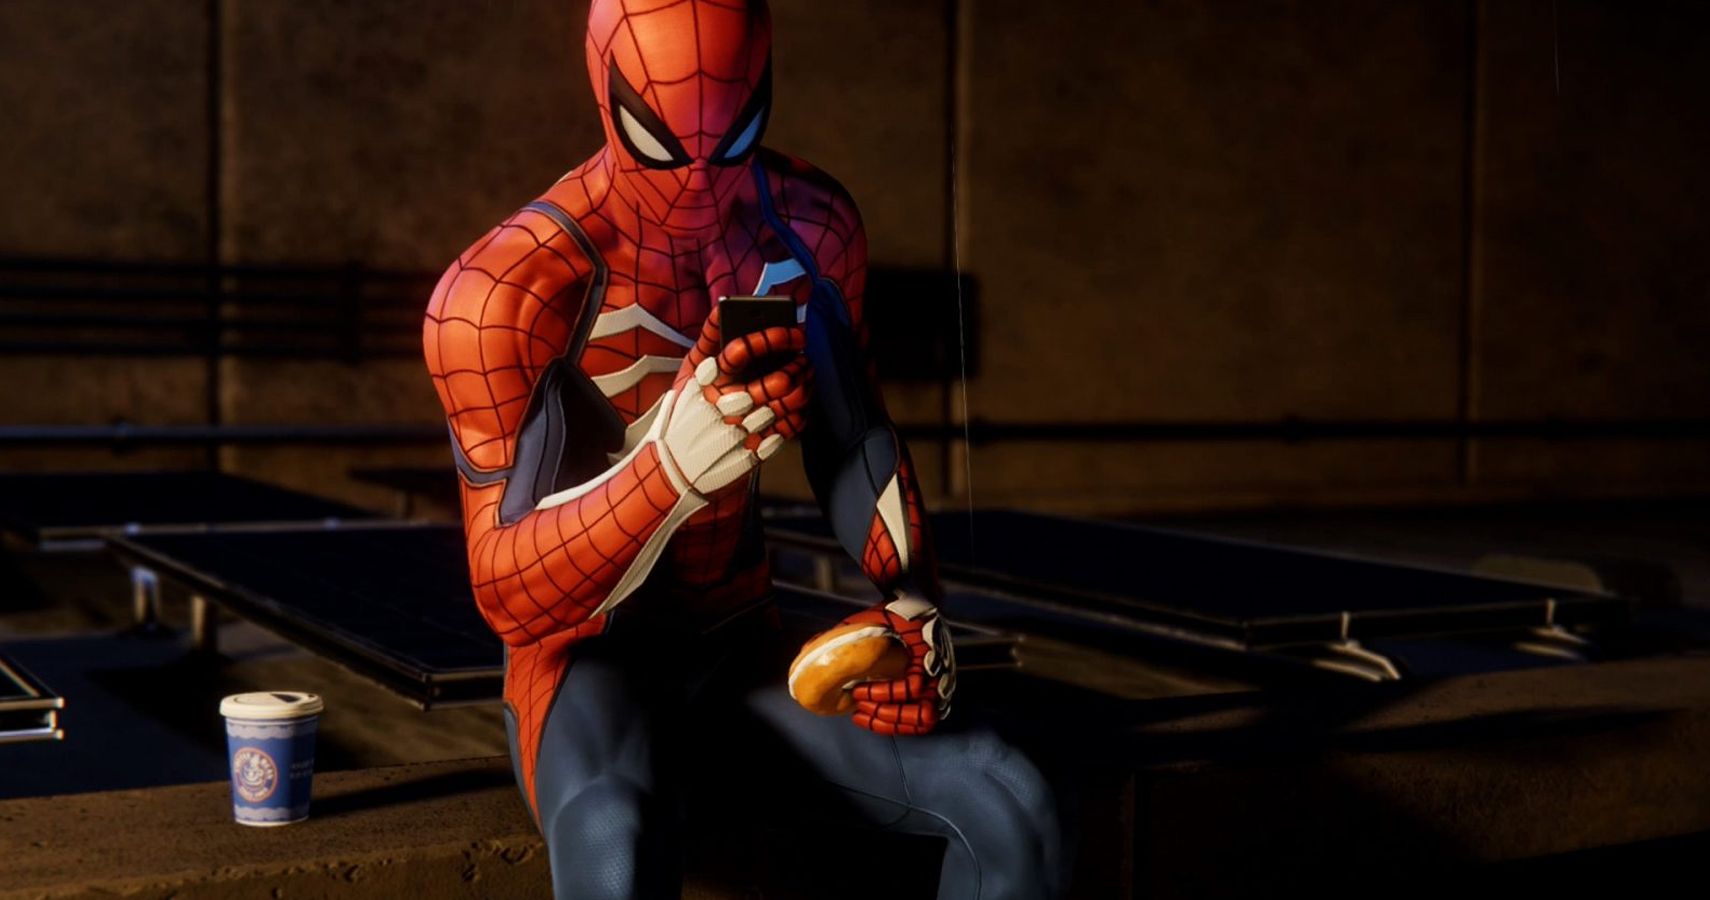 Spider-Man' PS4 Dialogue Goes a Long Way, and Here Are Examples